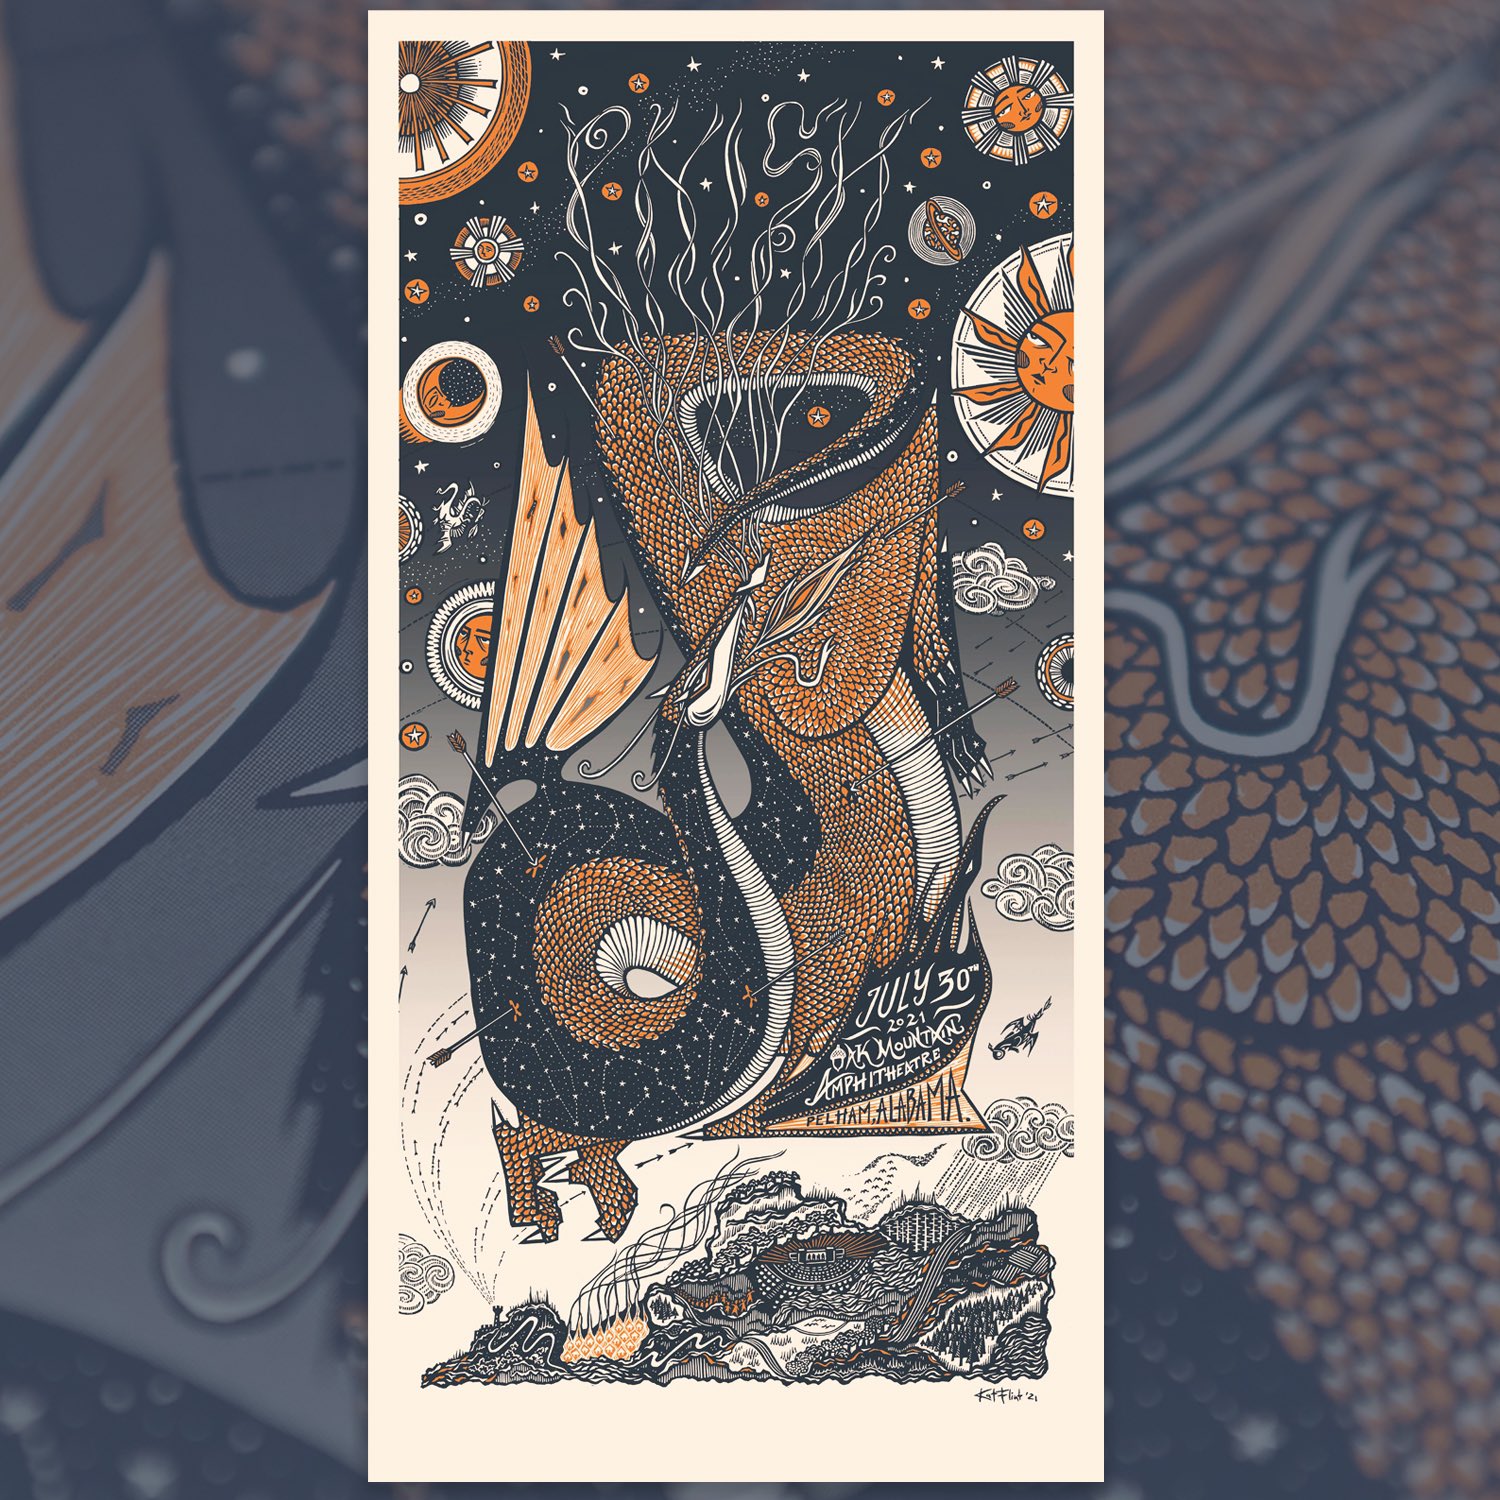 vase fysisk Ocean Phish Dry Goods on Twitter: "Here's tonight's LE poster for Pelham, AL by  Kat Flint. Original hand-carved linocut. 12x24. Edition of 900. Poster is a  2 color screenprint from the original block